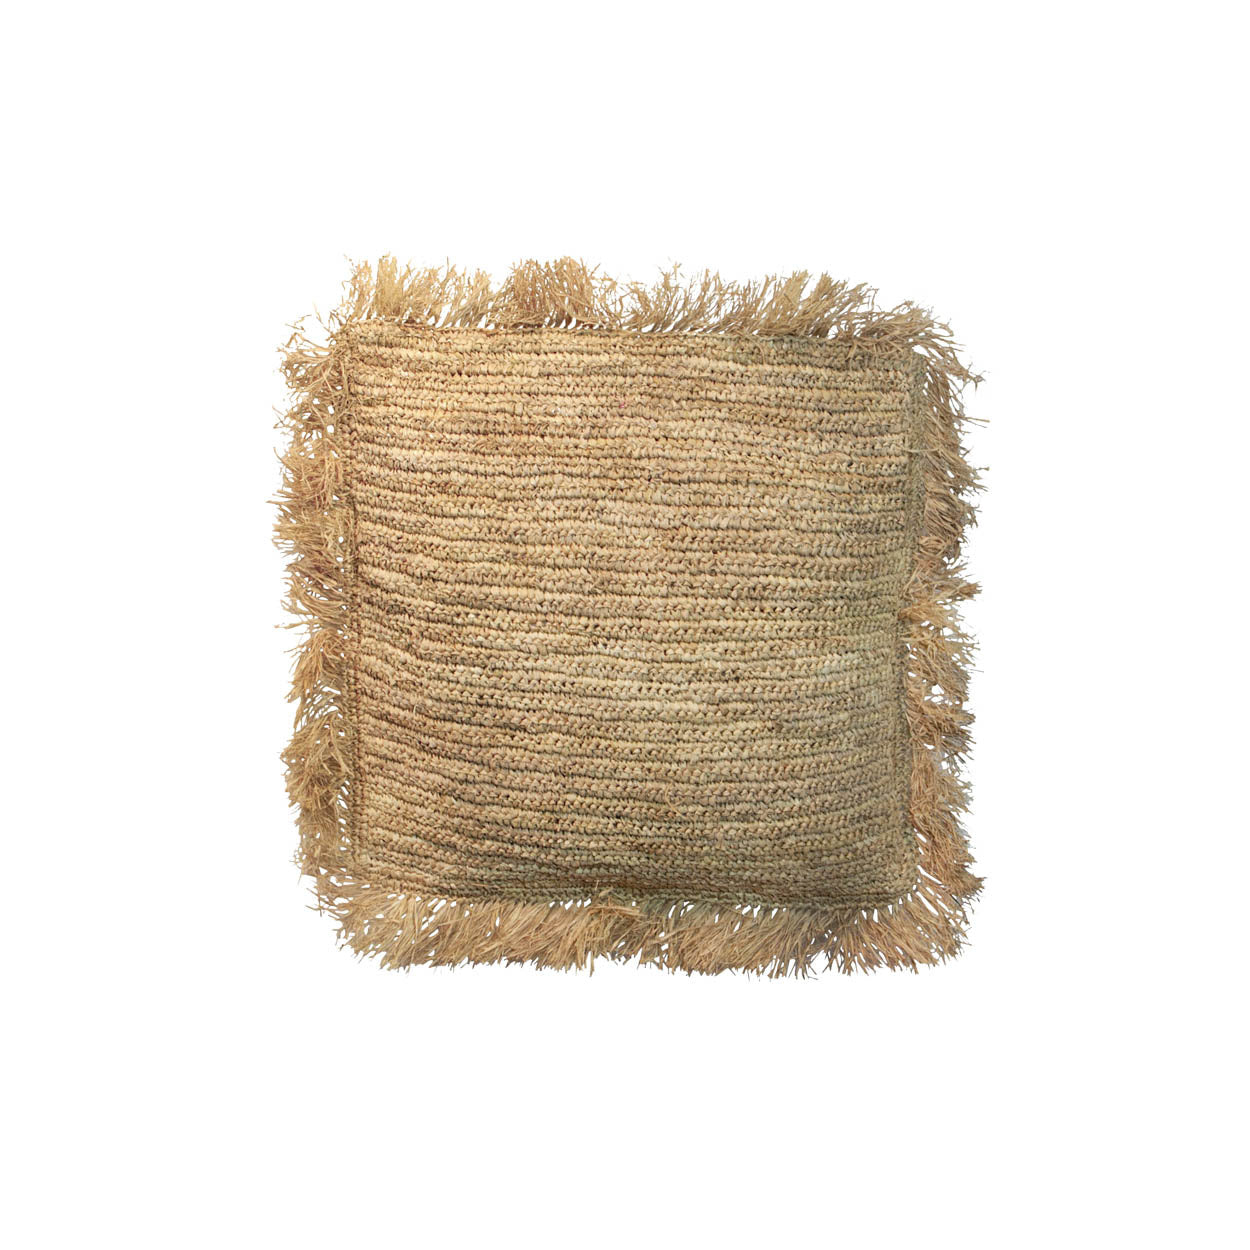 THE RAFFIA Cushion Cover natural small front view